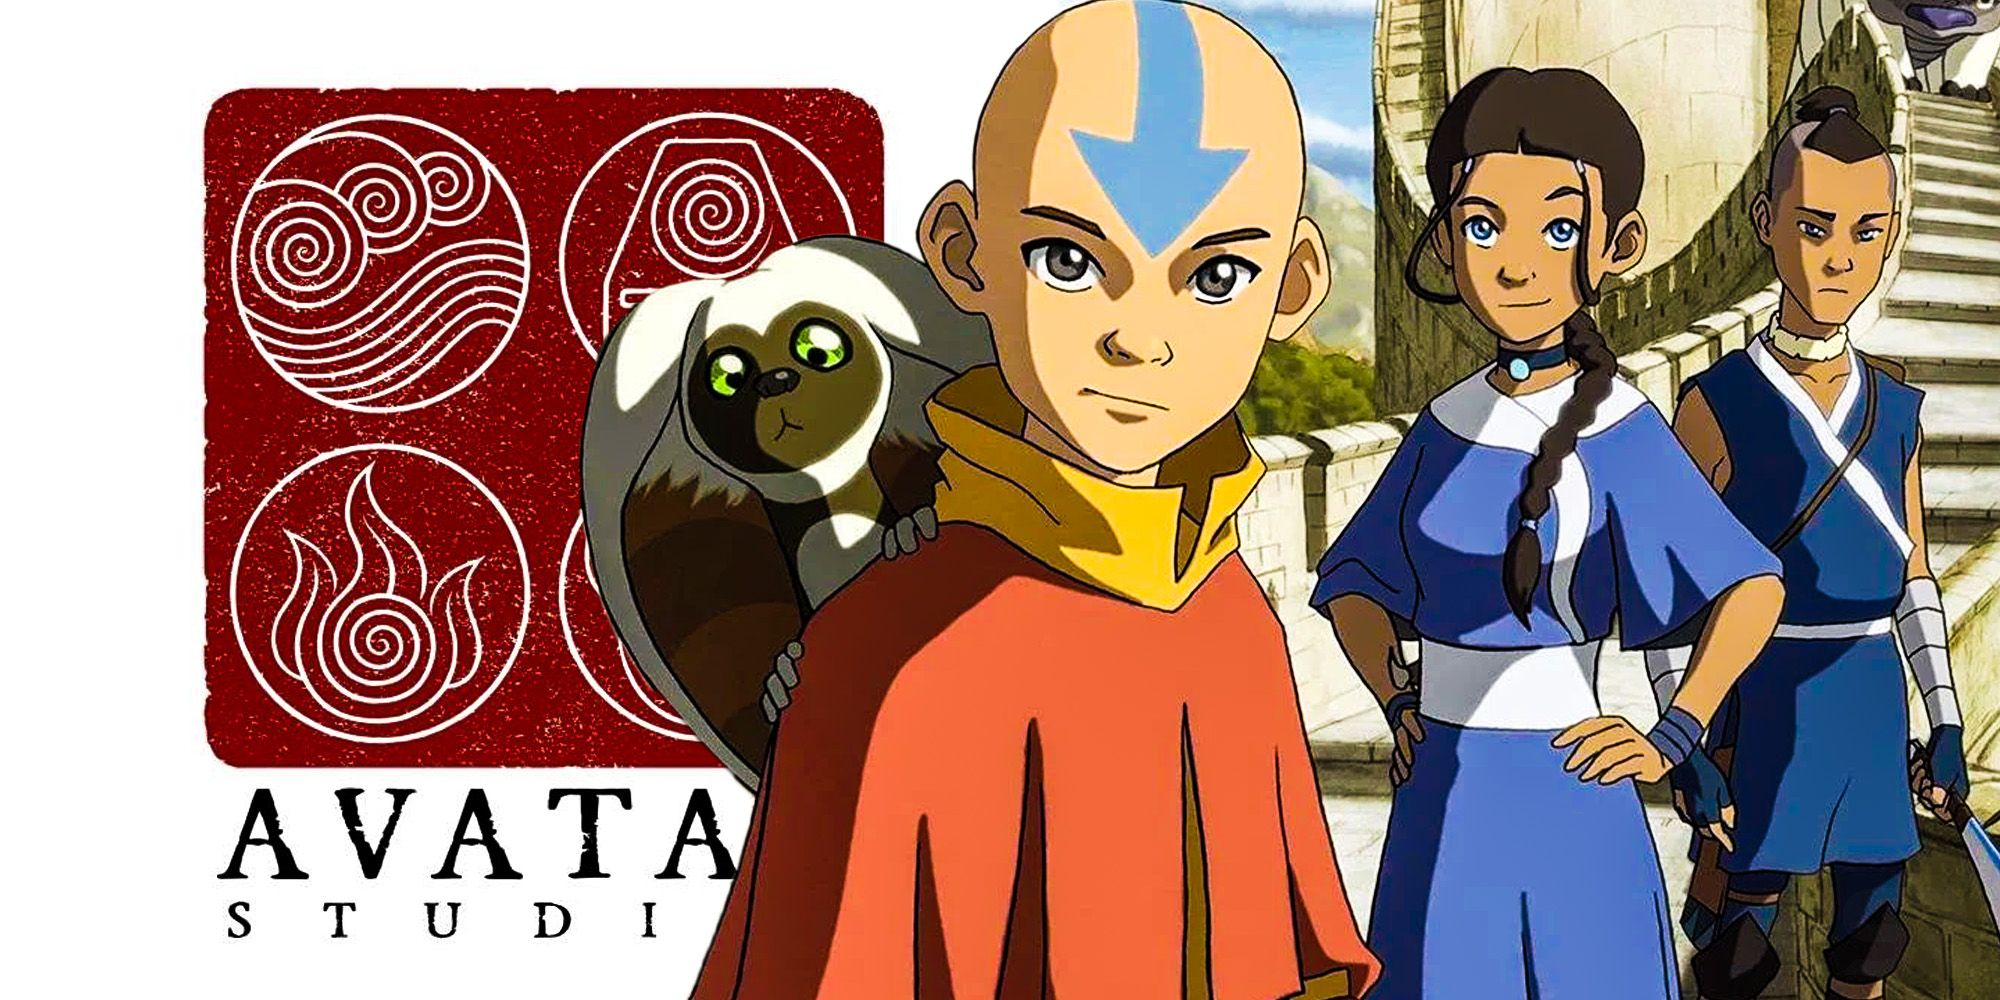 Avatar: The Last Airbender Animated Movie: Release Date & Story Details